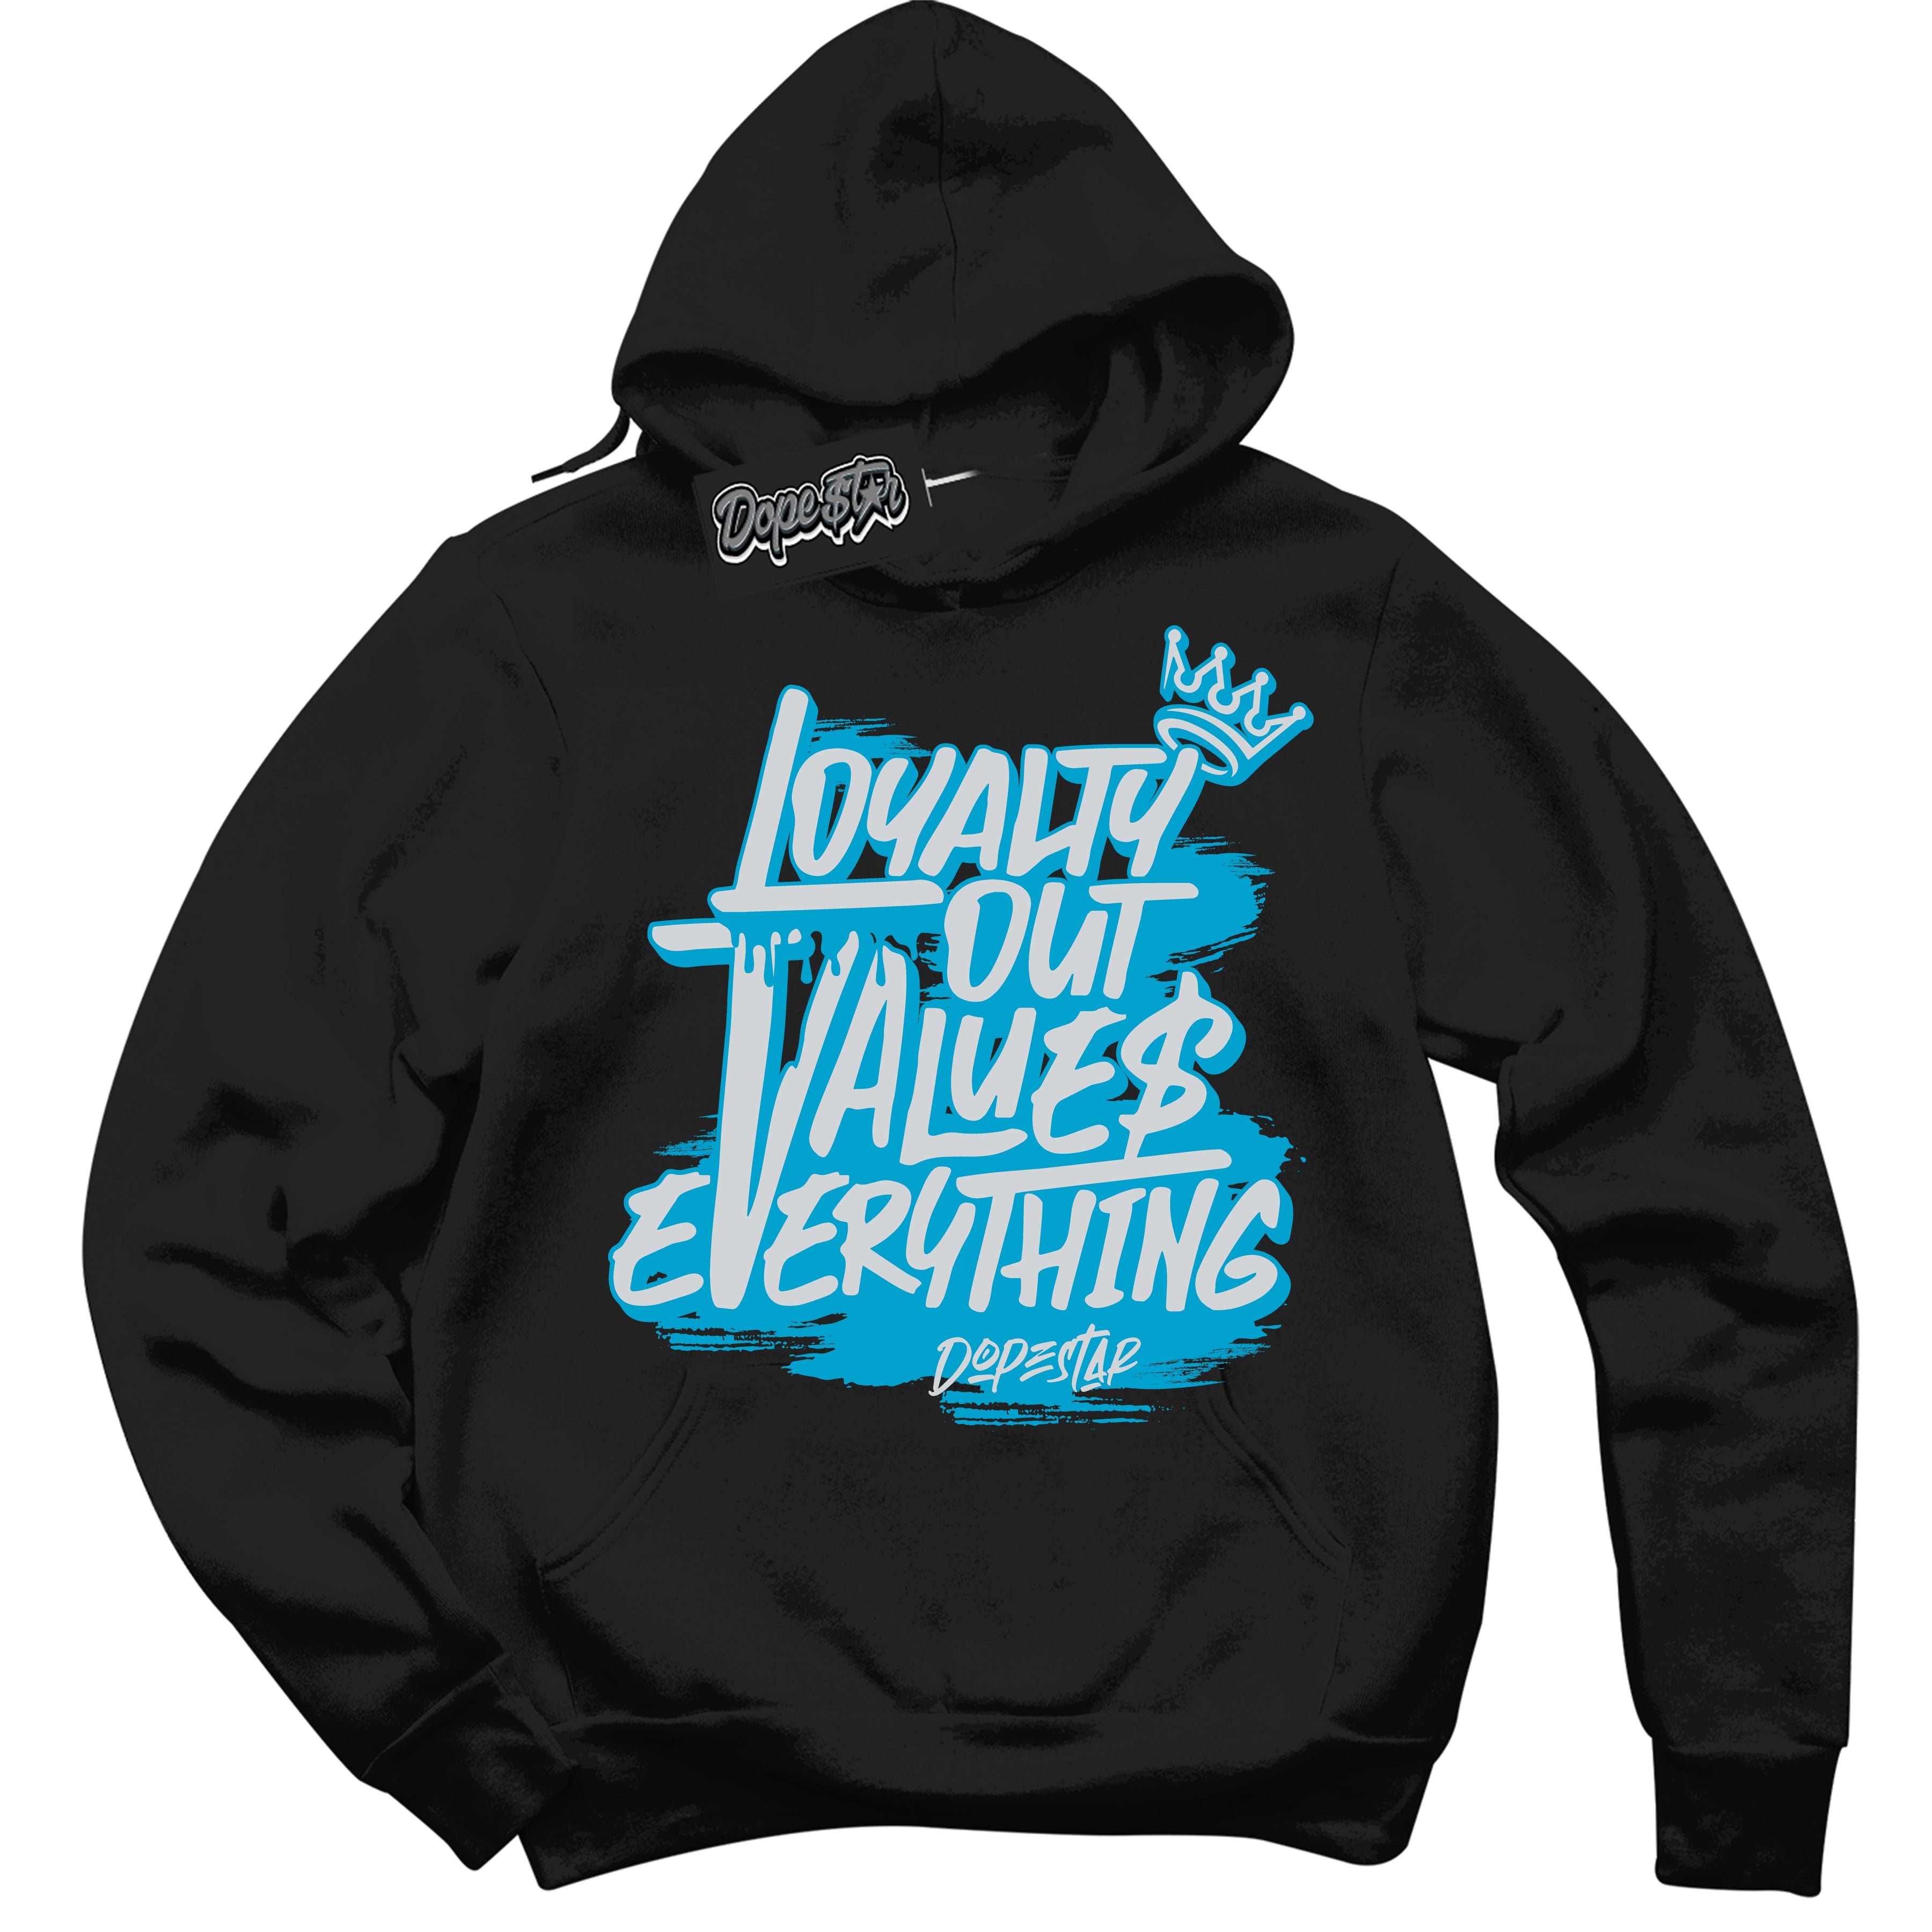 Cool Black Hoodie with “ Loyalty Out Values Everything ”  design that Perfectly Matches  Pure Platinum Blue Lightning Sneakers.